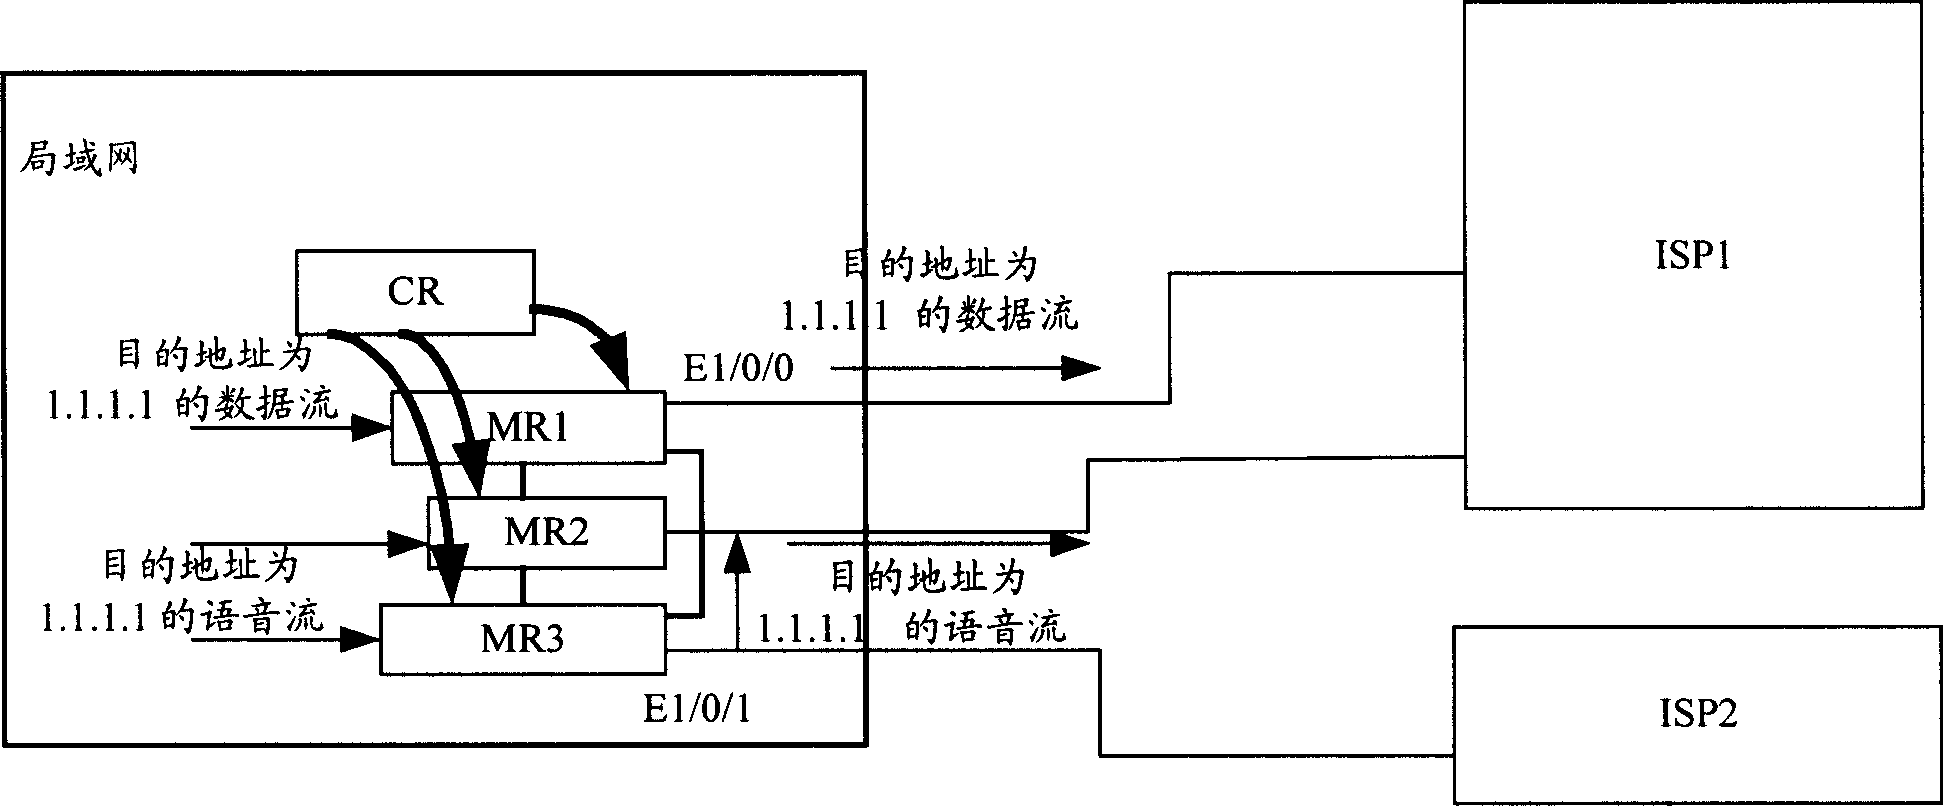 Method for selecting exit link according to flow and routing equipment of converting flow